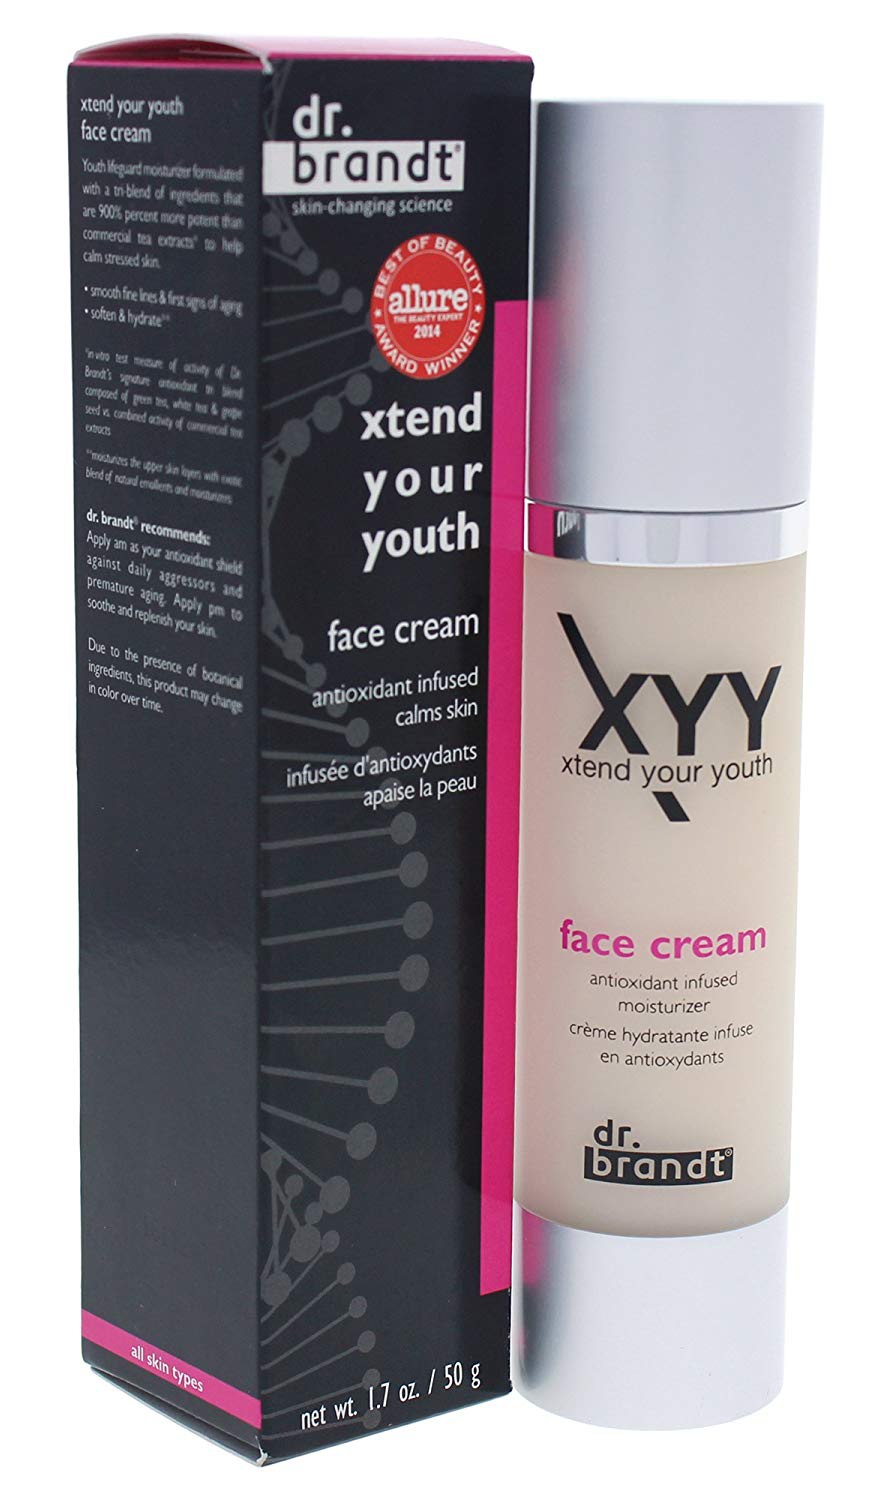 Dr. Brandt Xtend Your Youth Face Cream